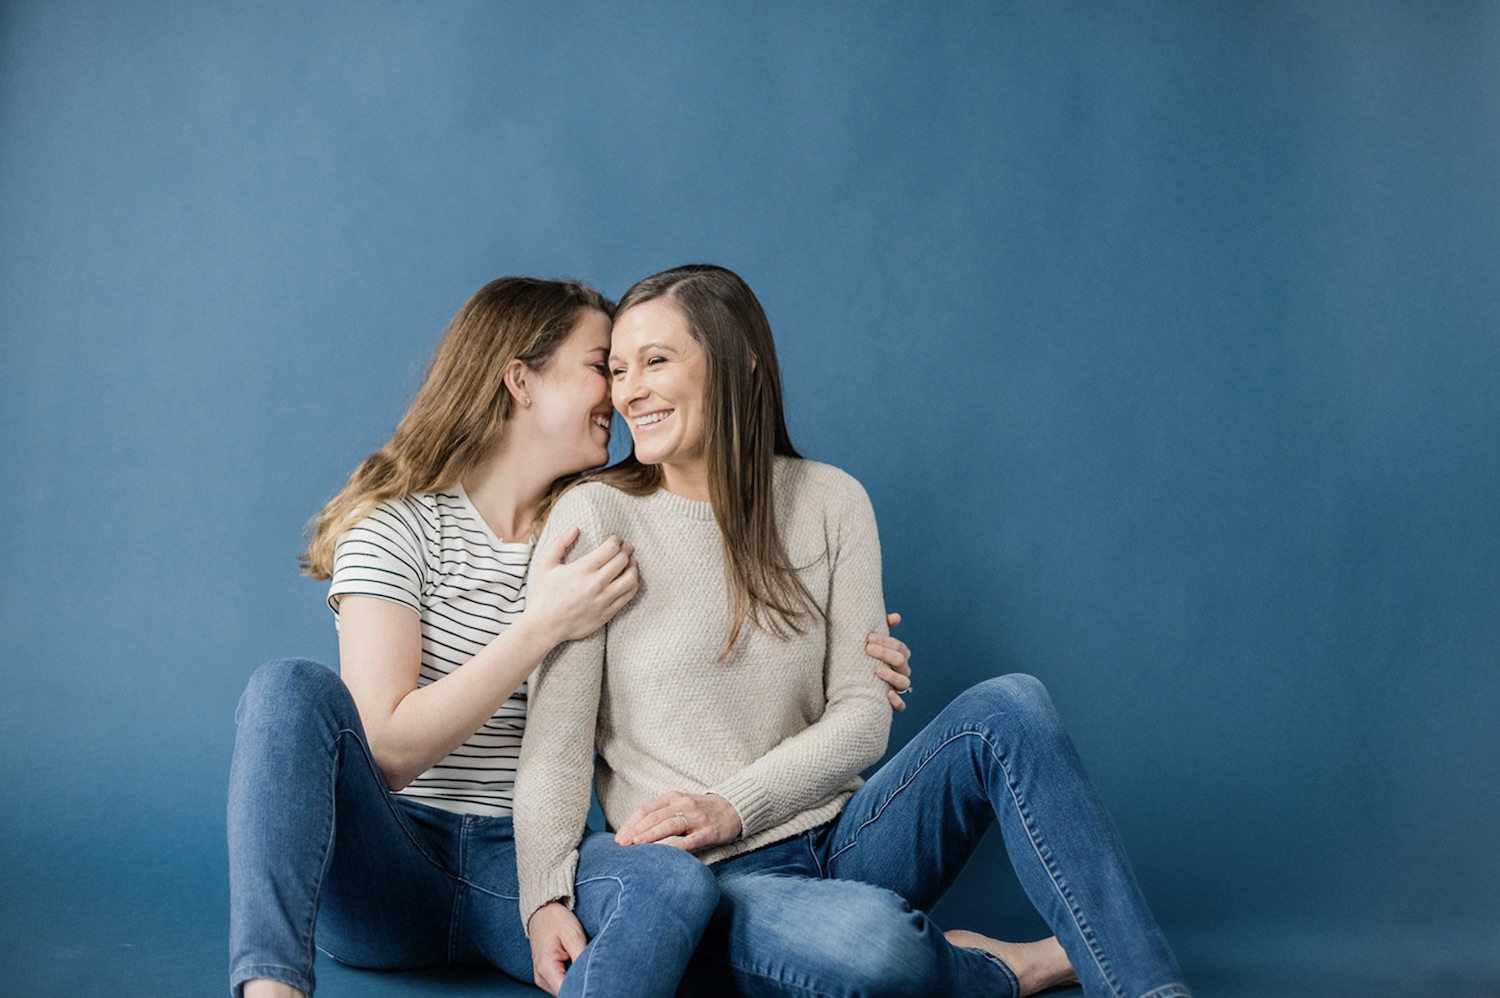 Woman whispering in partner's ear as she laughs during their engagement shoot where they both wear matching denim jeans and sit with a blue backdrop behind them, taken by Jason Moody Photography